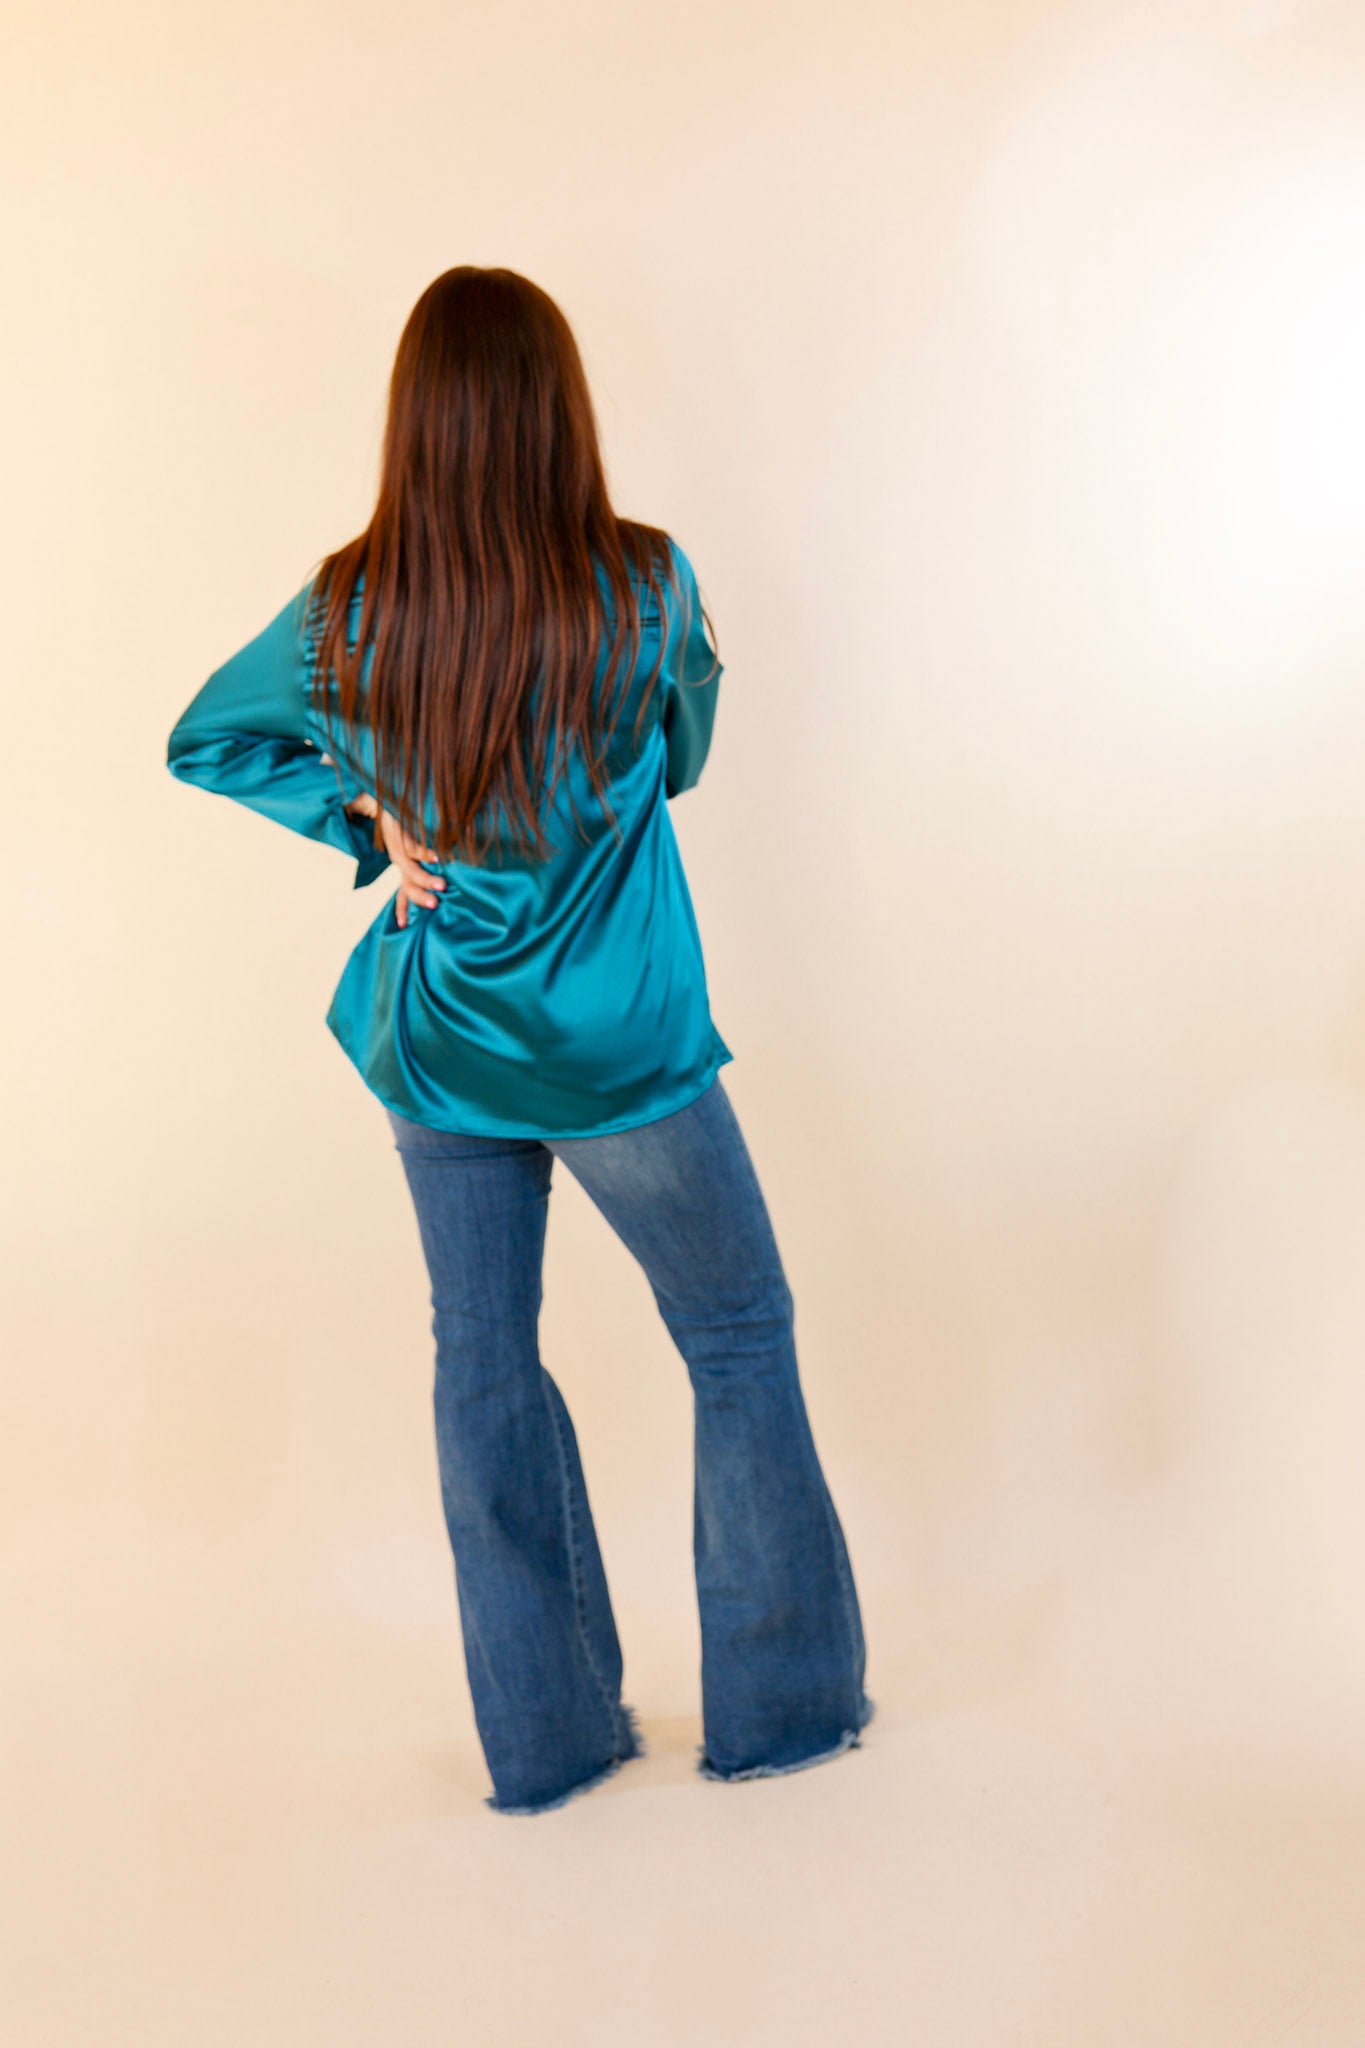 Down To Disco Satin Long Sleeve Button Up Top in Teal Blue - Giddy Up Glamour Boutique